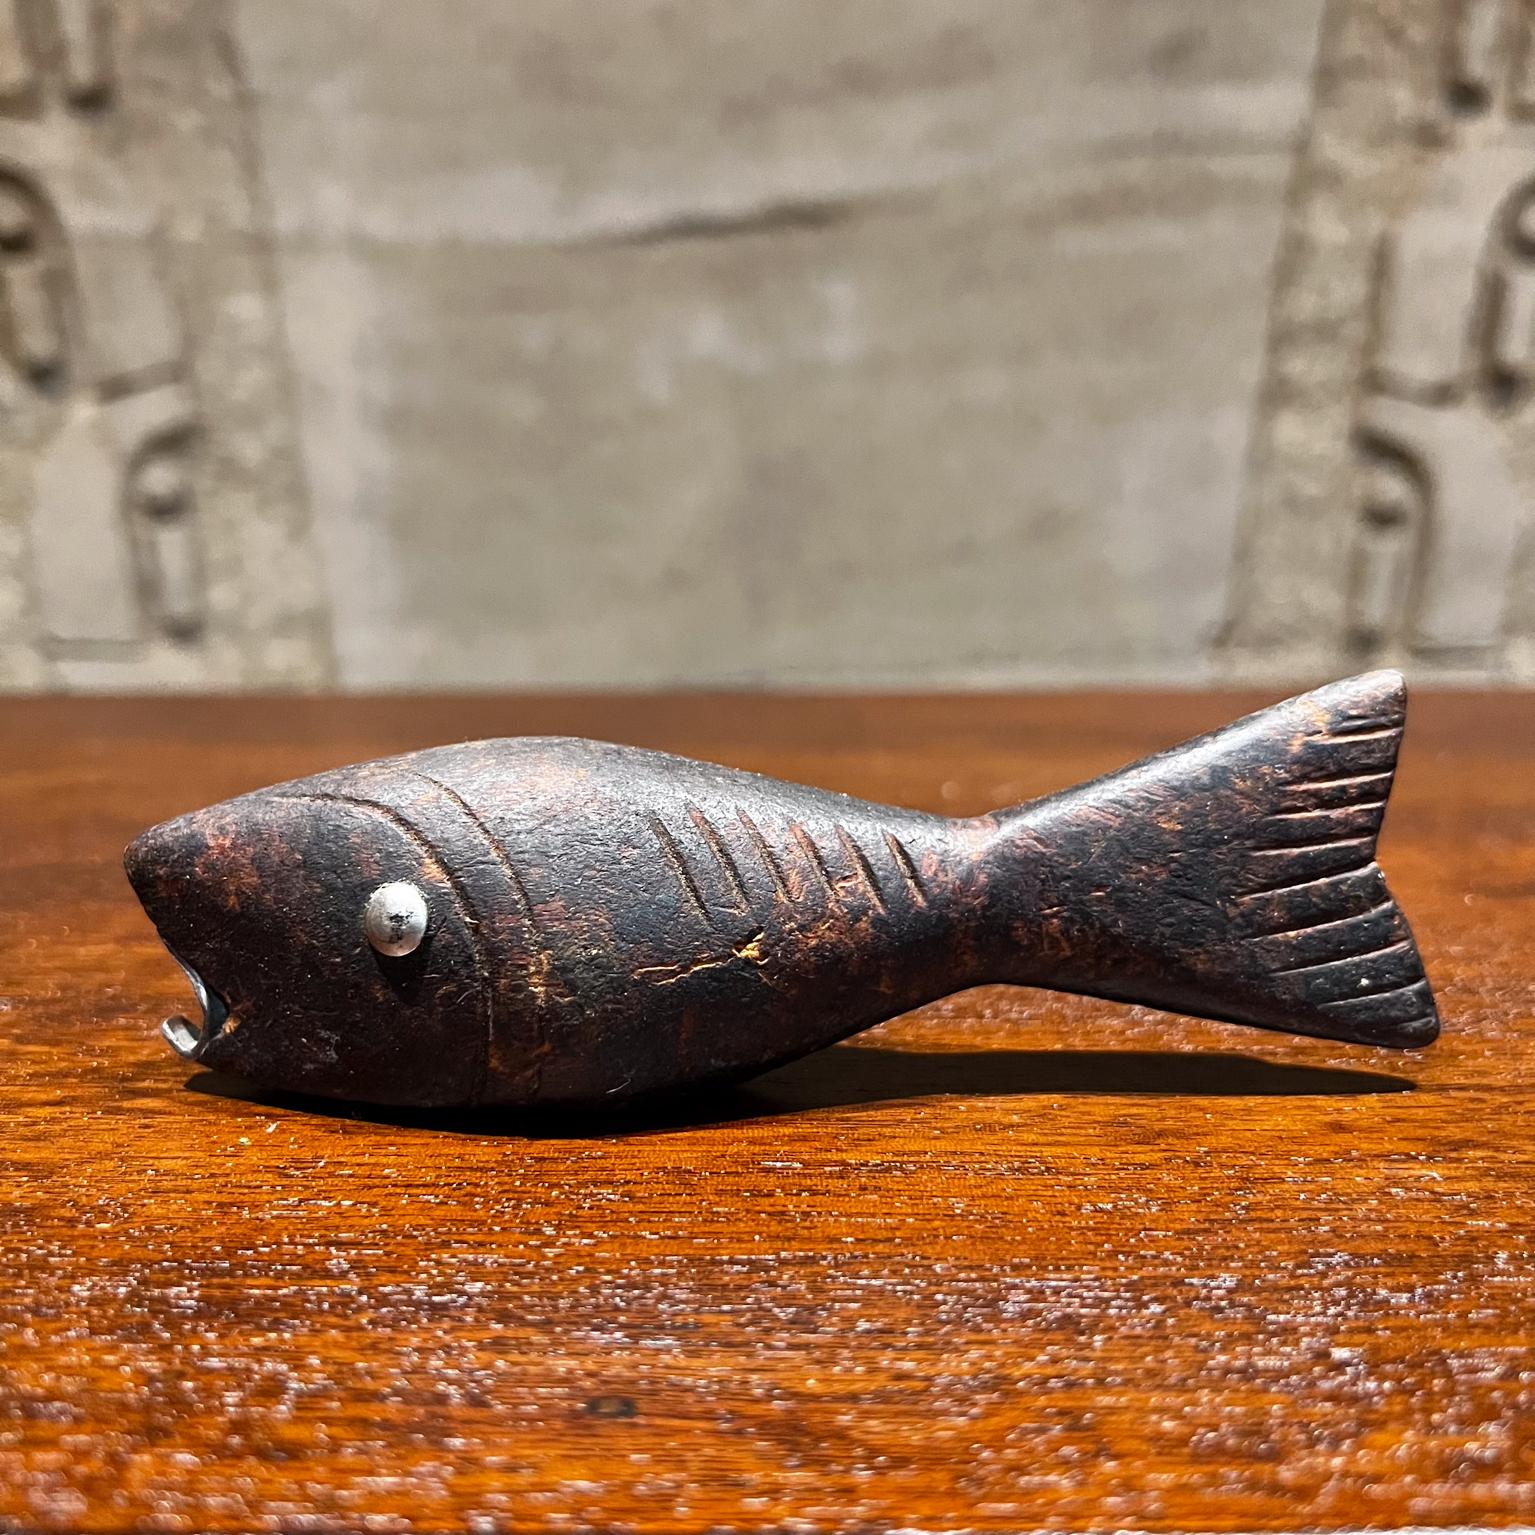 1960s Modern Fish Handcrafted Wood Bottle Opener
Unmarked
6.25 w x 1.75 tall x 1.5
Preowned vintage condition unrestored.
See all images.